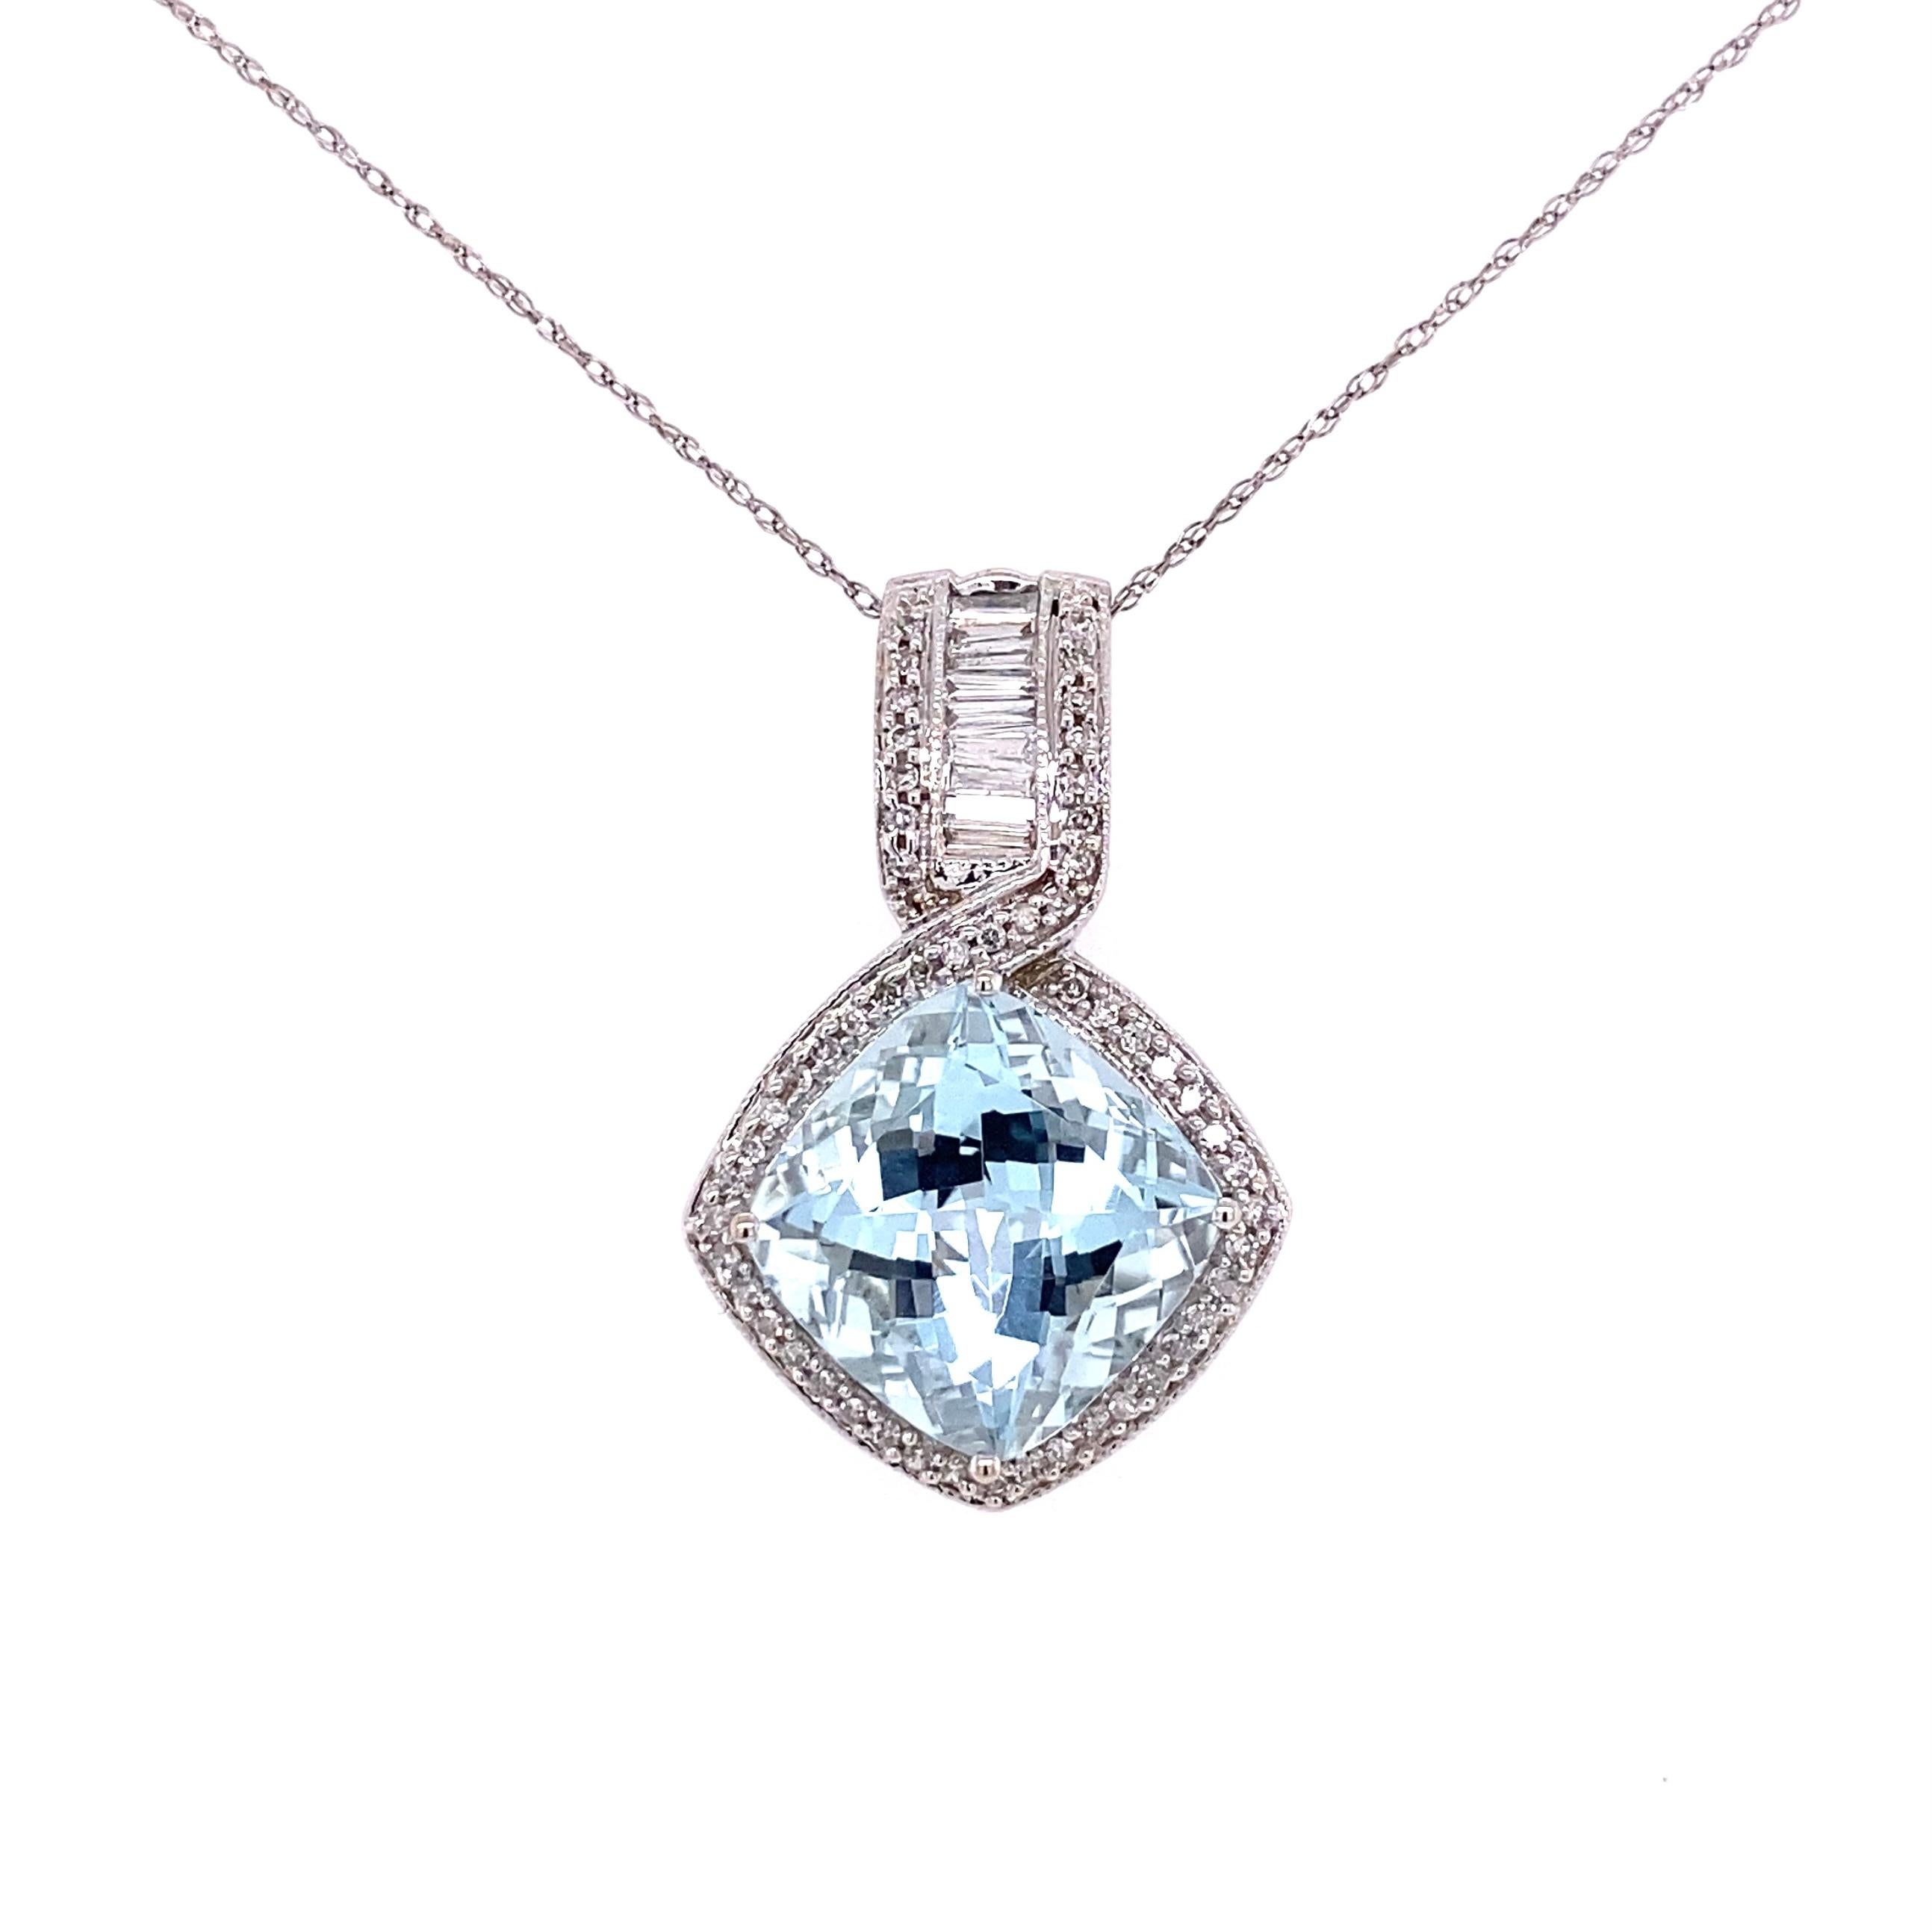 Simply Beautiful! Aquamarine and Diamond Gold Art Deco Revival Pendant Necklace. Centering a securely nestled Hand set Oval Aquamarine approx. 9.5 Carat. Beautifully Hand-crafted 14K White Gold surround Hand set with Diamonds, approx. 0.70tcw.